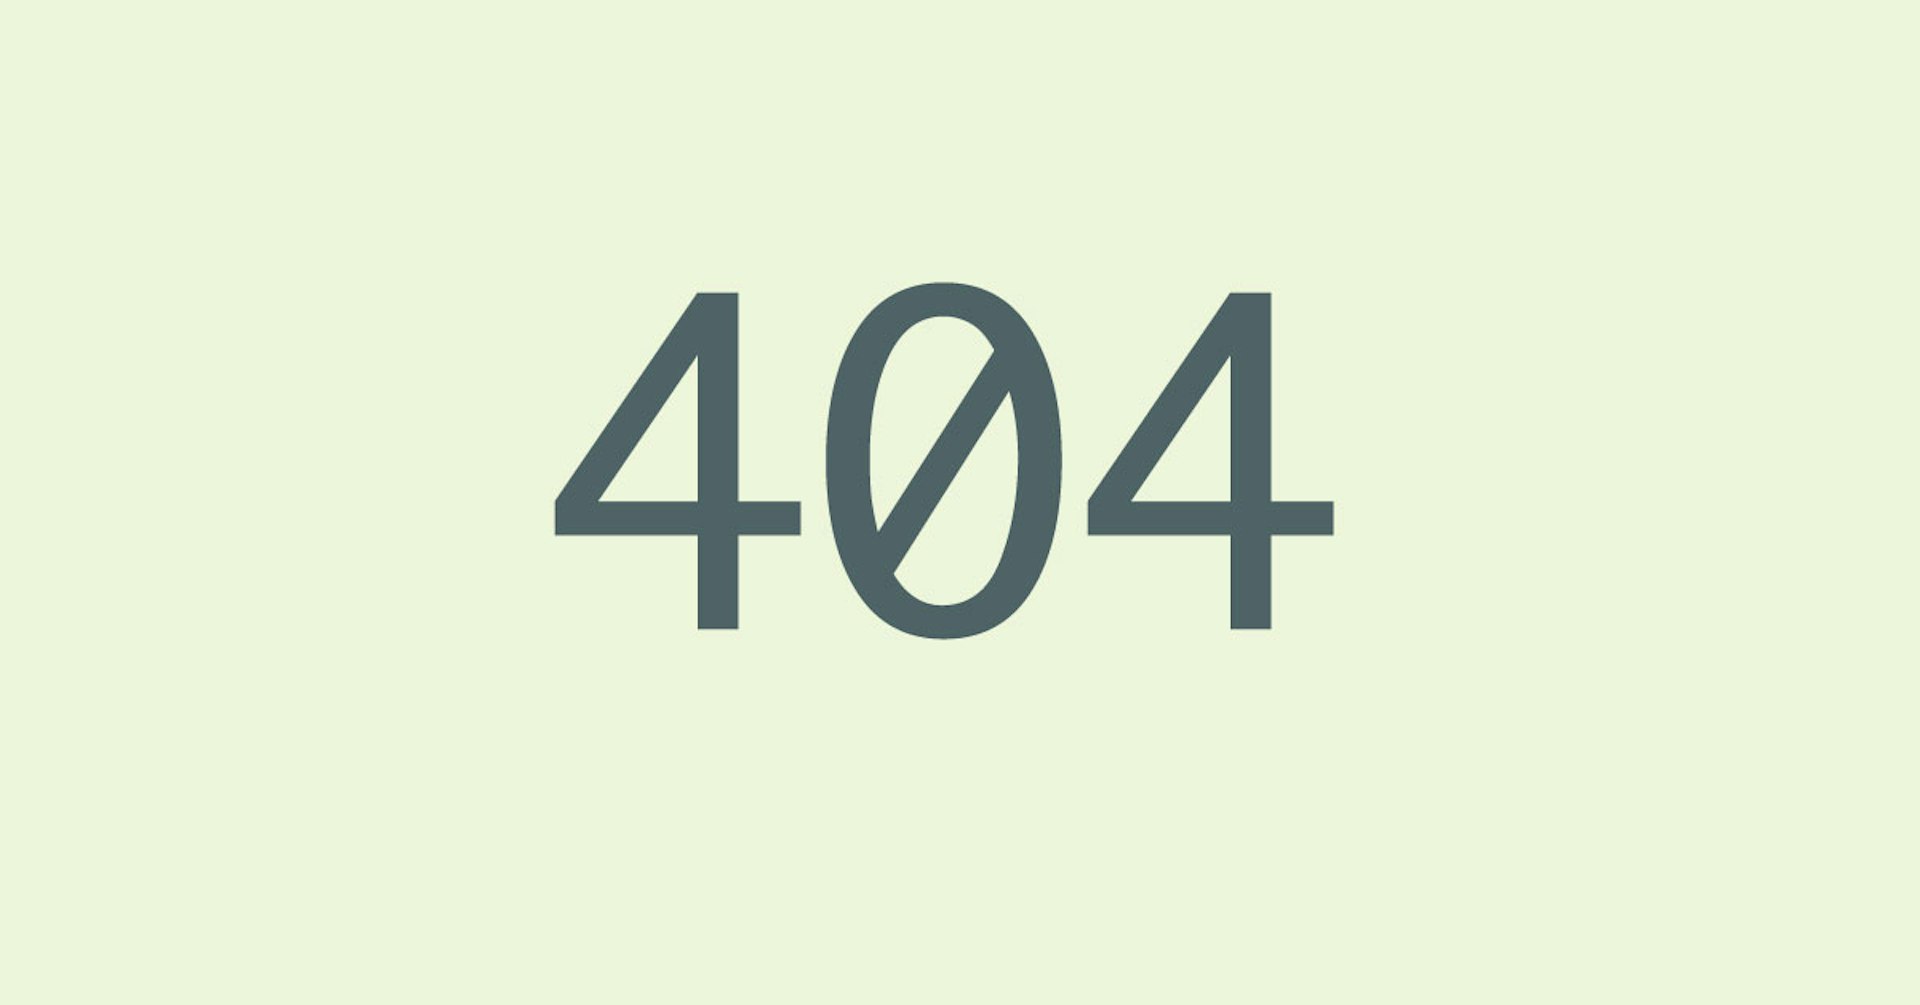 Why You Should Care About Your Website's 404 Page